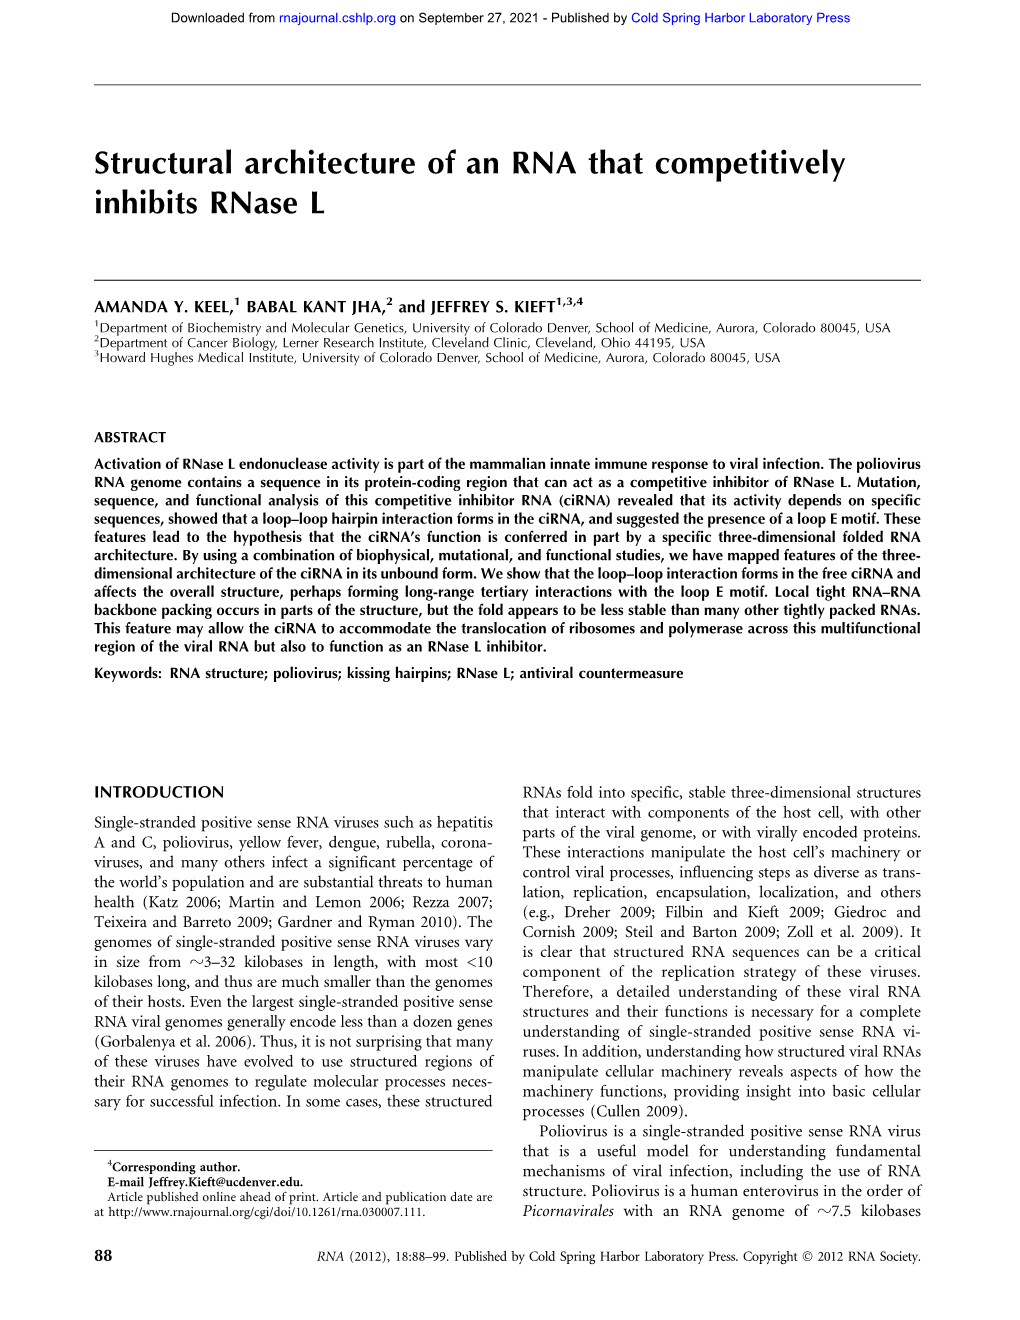 Structural Architecture of an RNA That Competitively Inhibits Rnase L